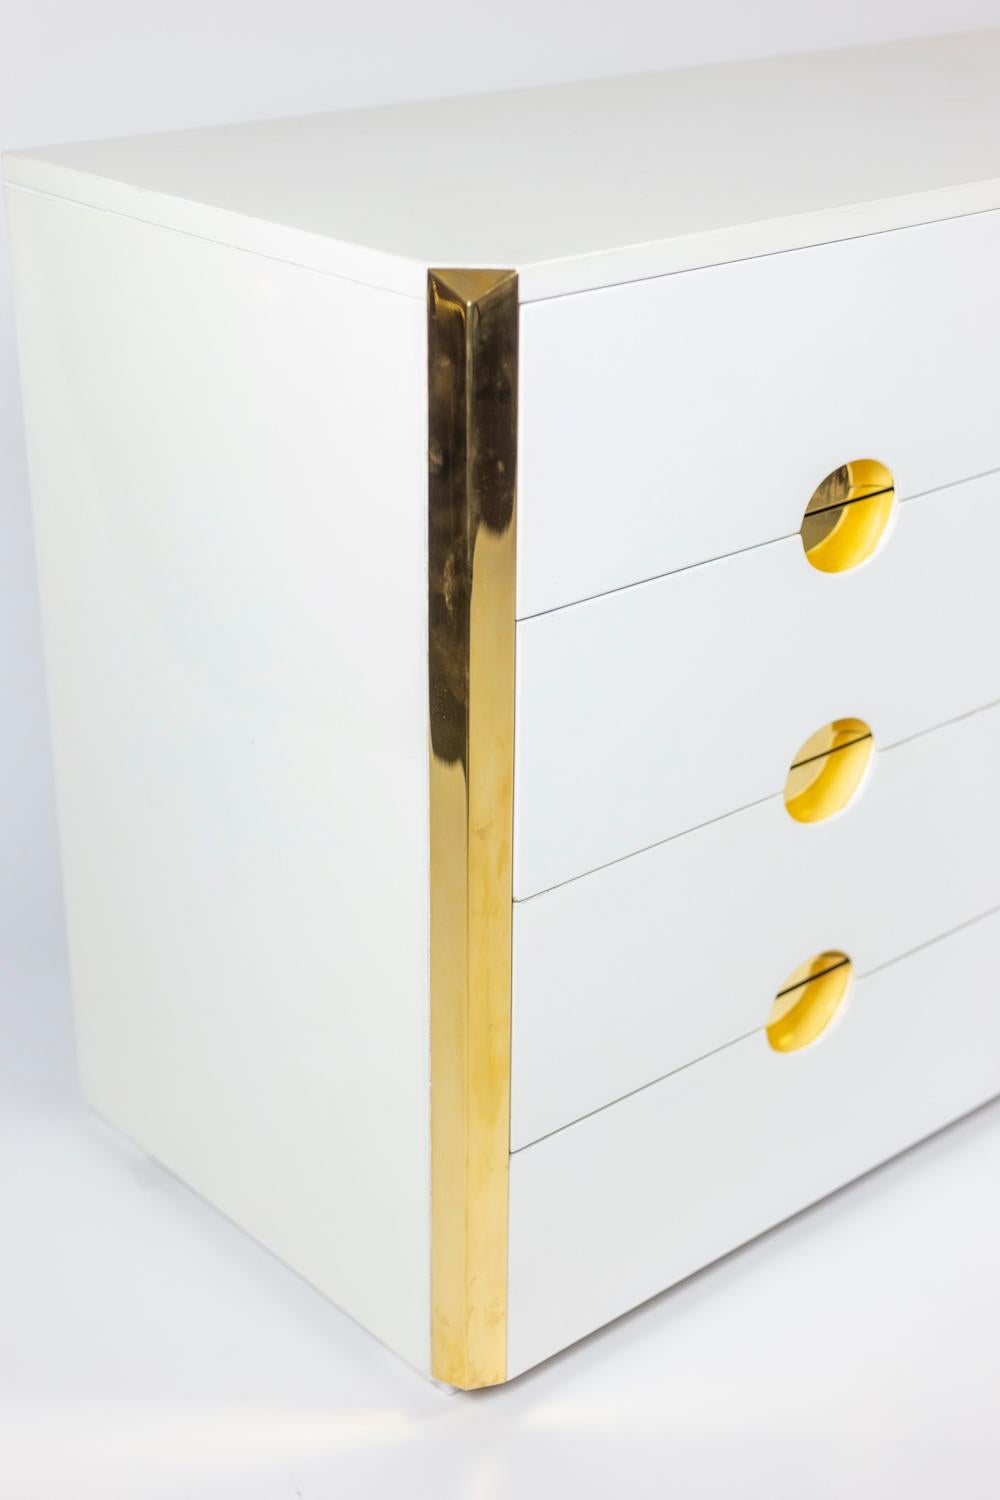 Late 20th Century Luigi Caccia Dominioni, Chest of Drawers in Lacquer and Brass, 1970s For Sale